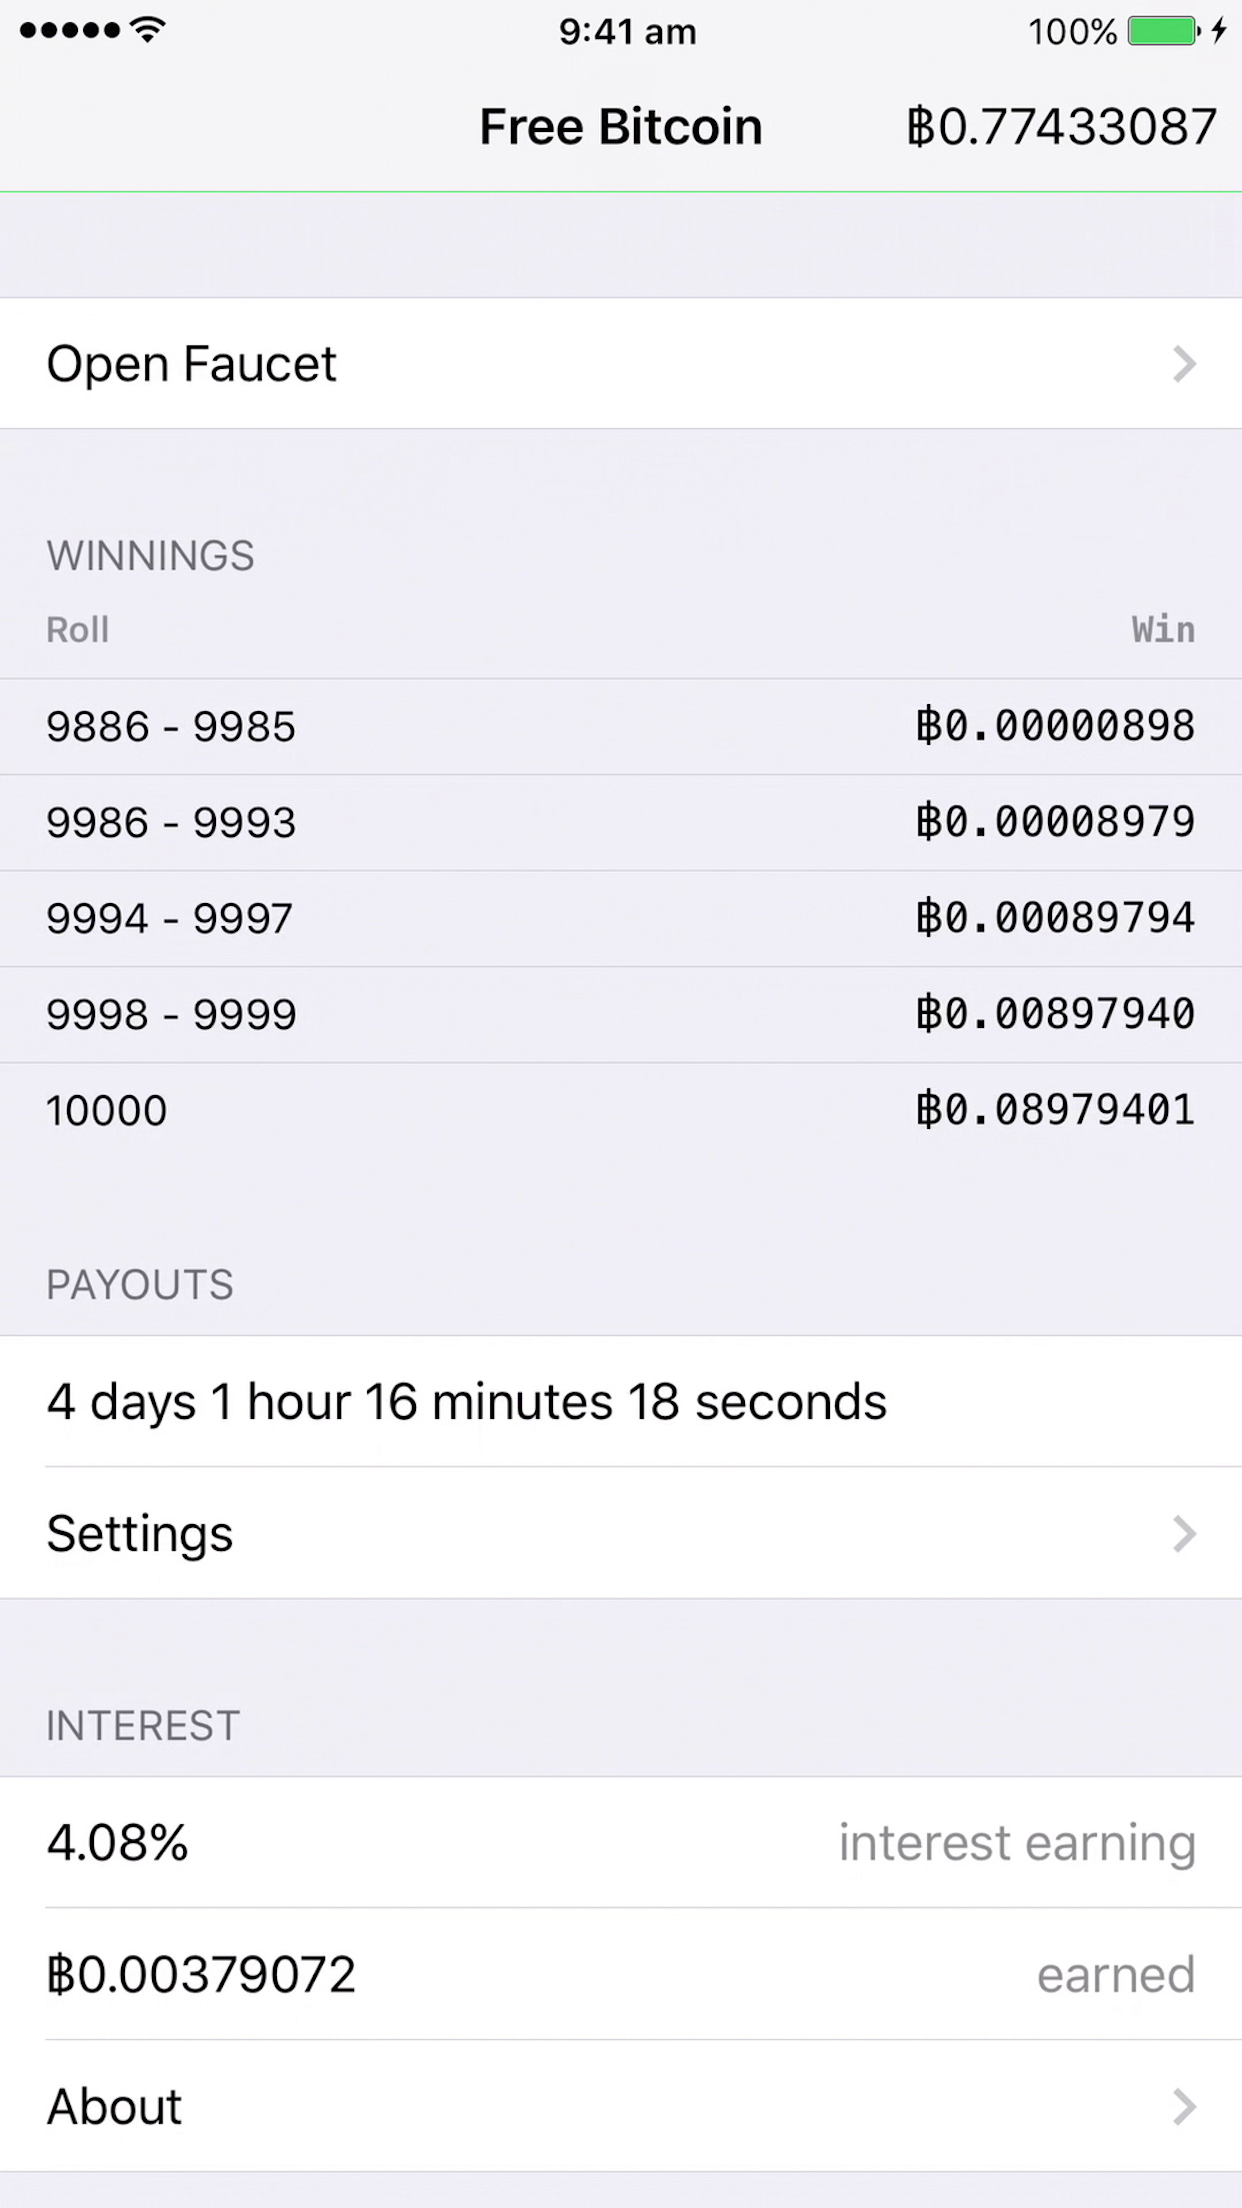 Lottery system, win over 1.5 BTC, 10 winners selected each week